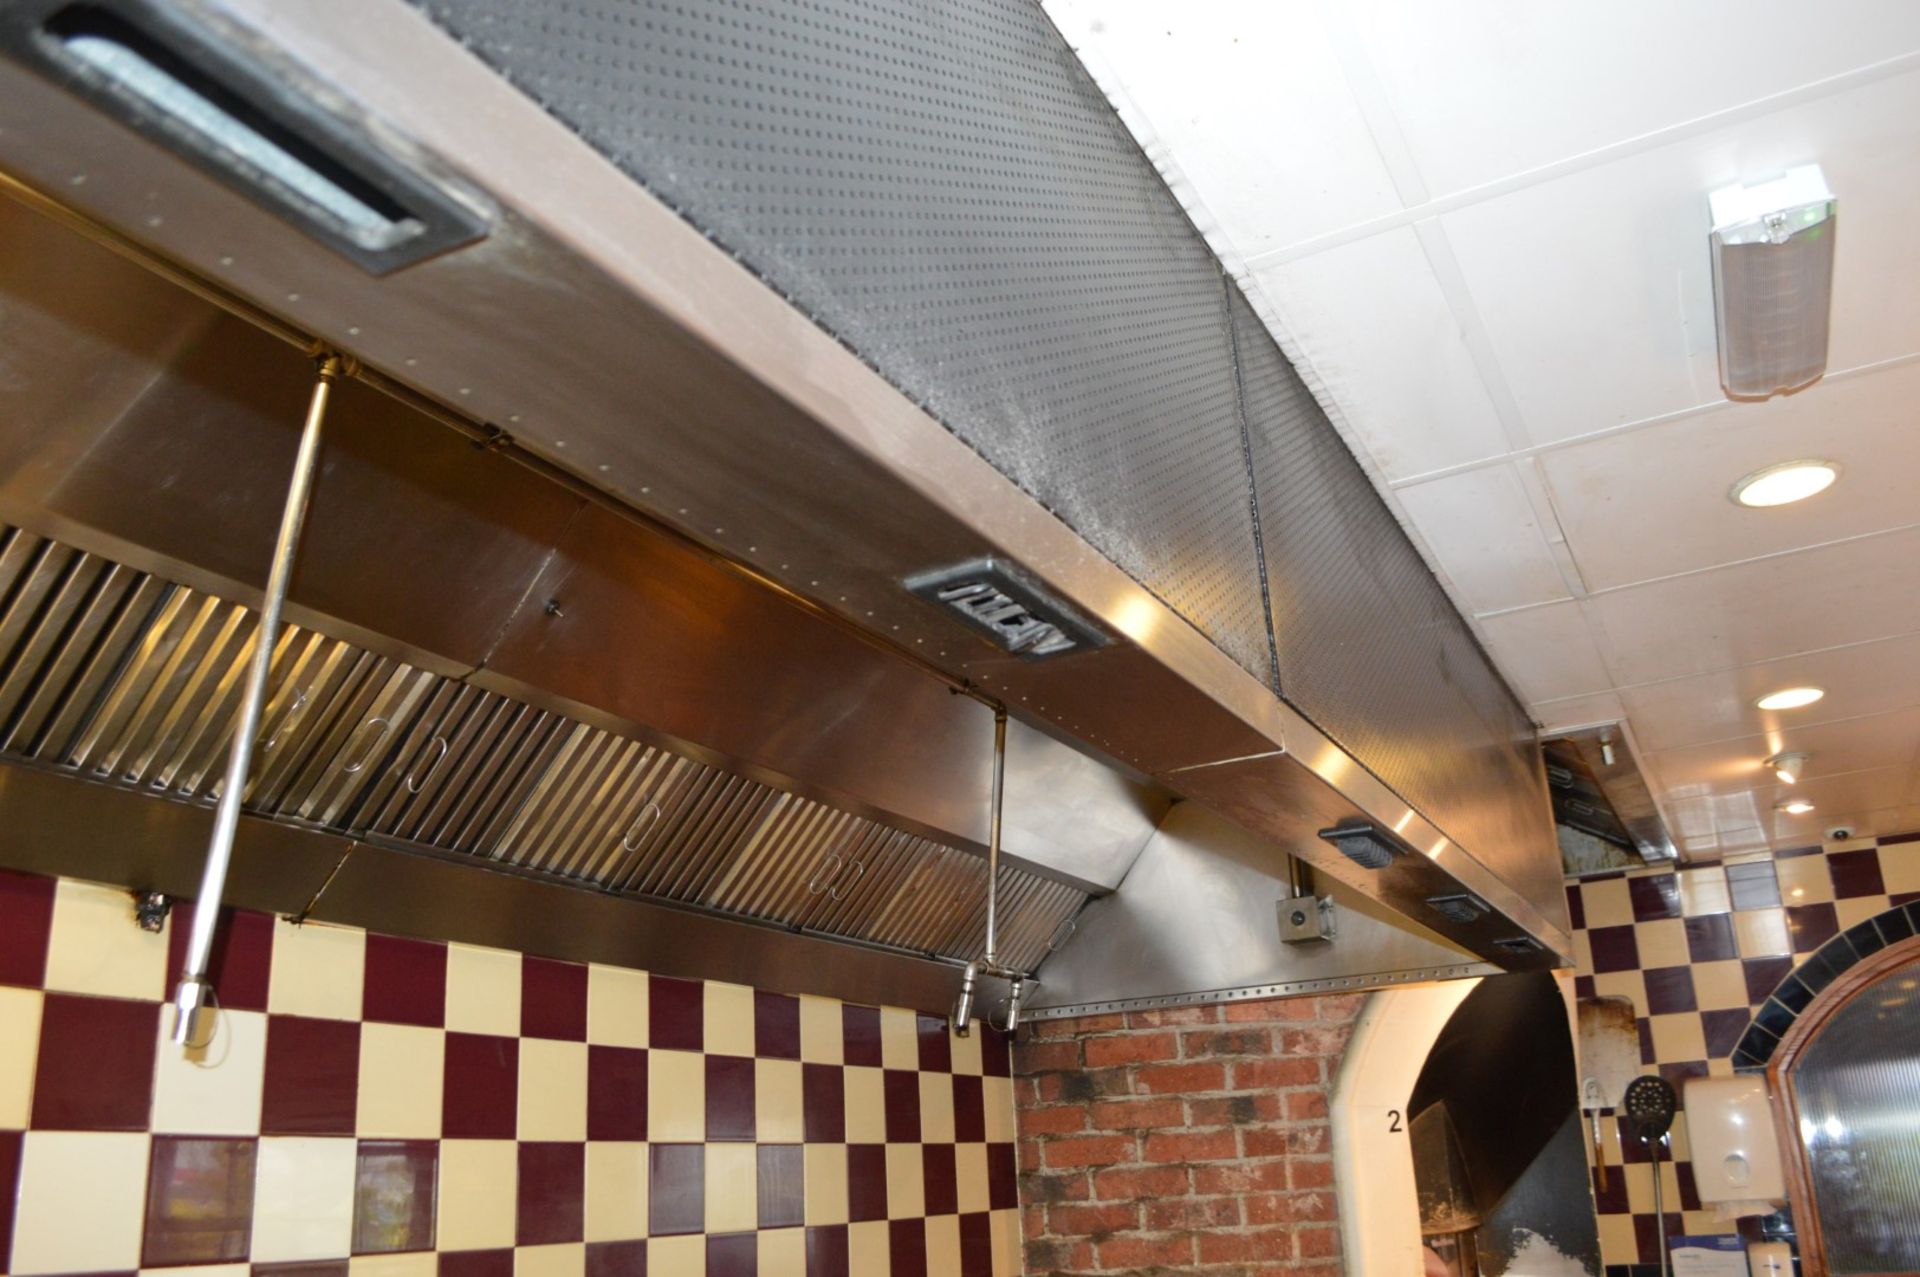 1 x Commercial Stainless Steel Kitchen Extractor Canopy With Ansul R-102 Fire Suppression System - - Image 6 of 13